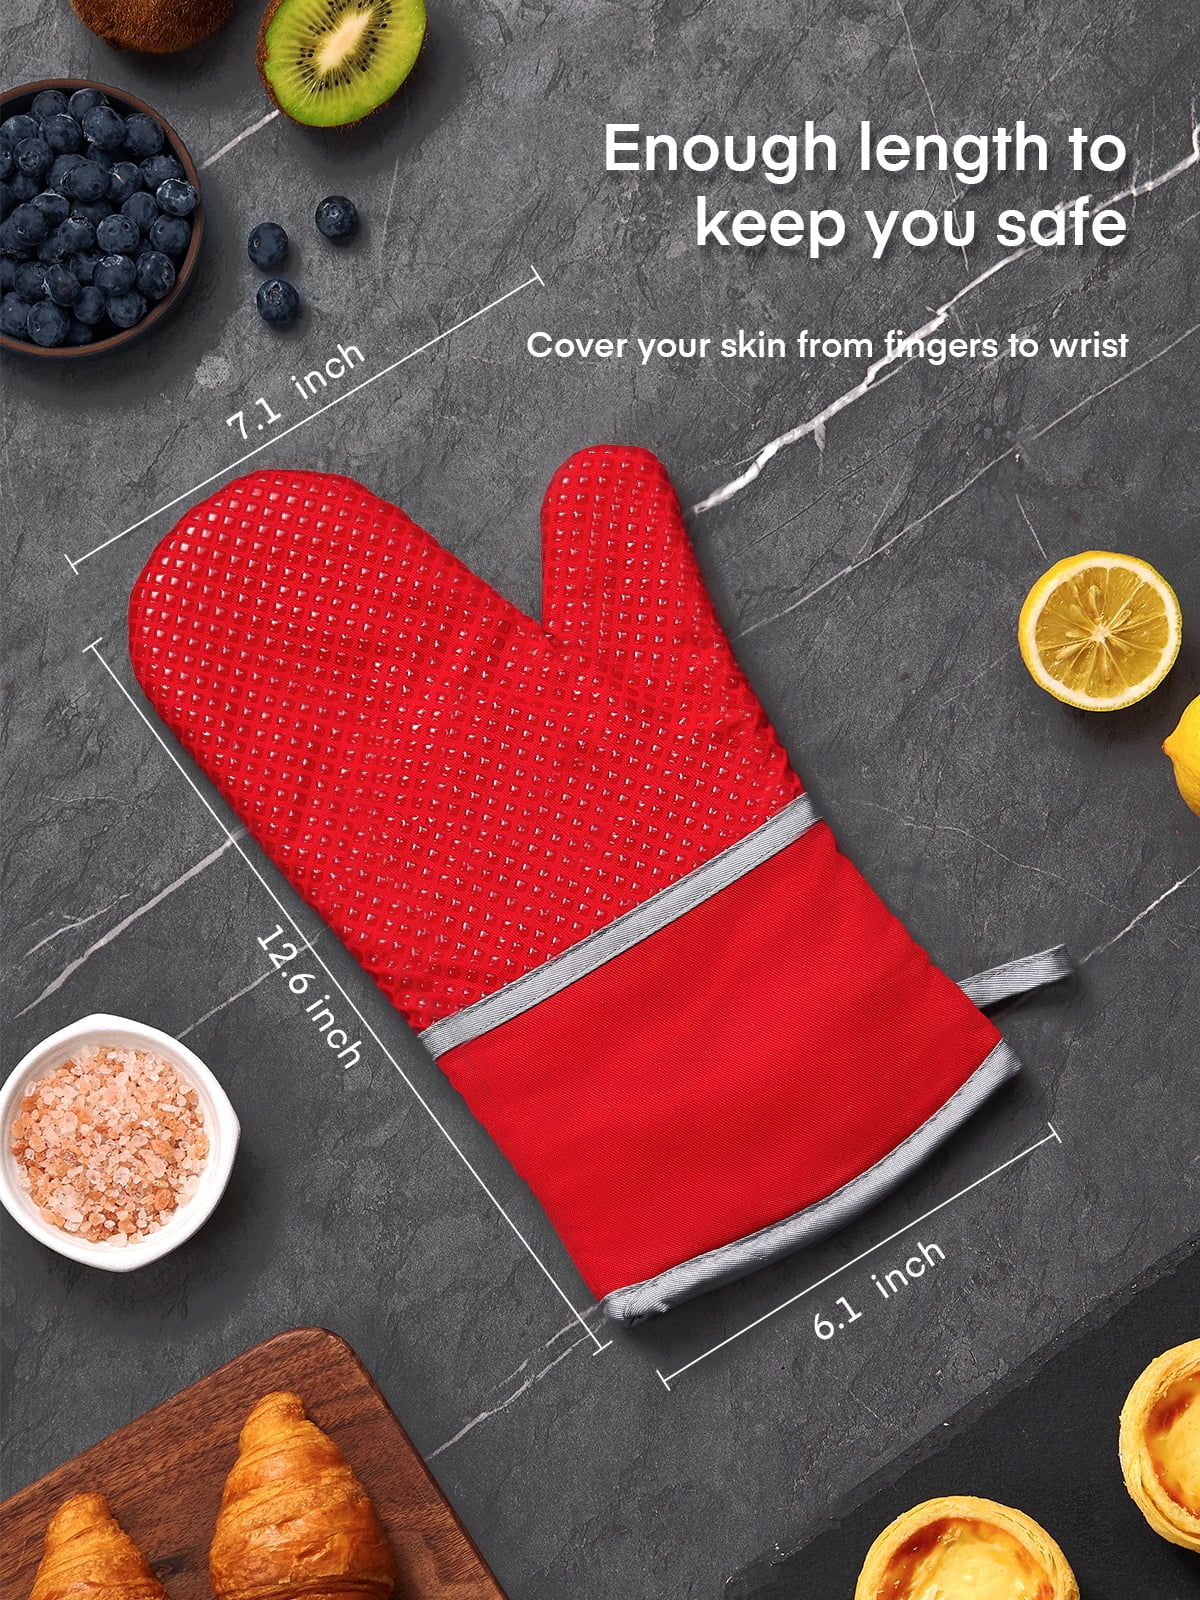 Oven Mitts, Heat Resistant Kitchen Oven Gloves 572°F, Non-Slip Silicone Surface, Extra Long Flexible Thick Mitts for Kitchen , Cooking , Baking , BBQ